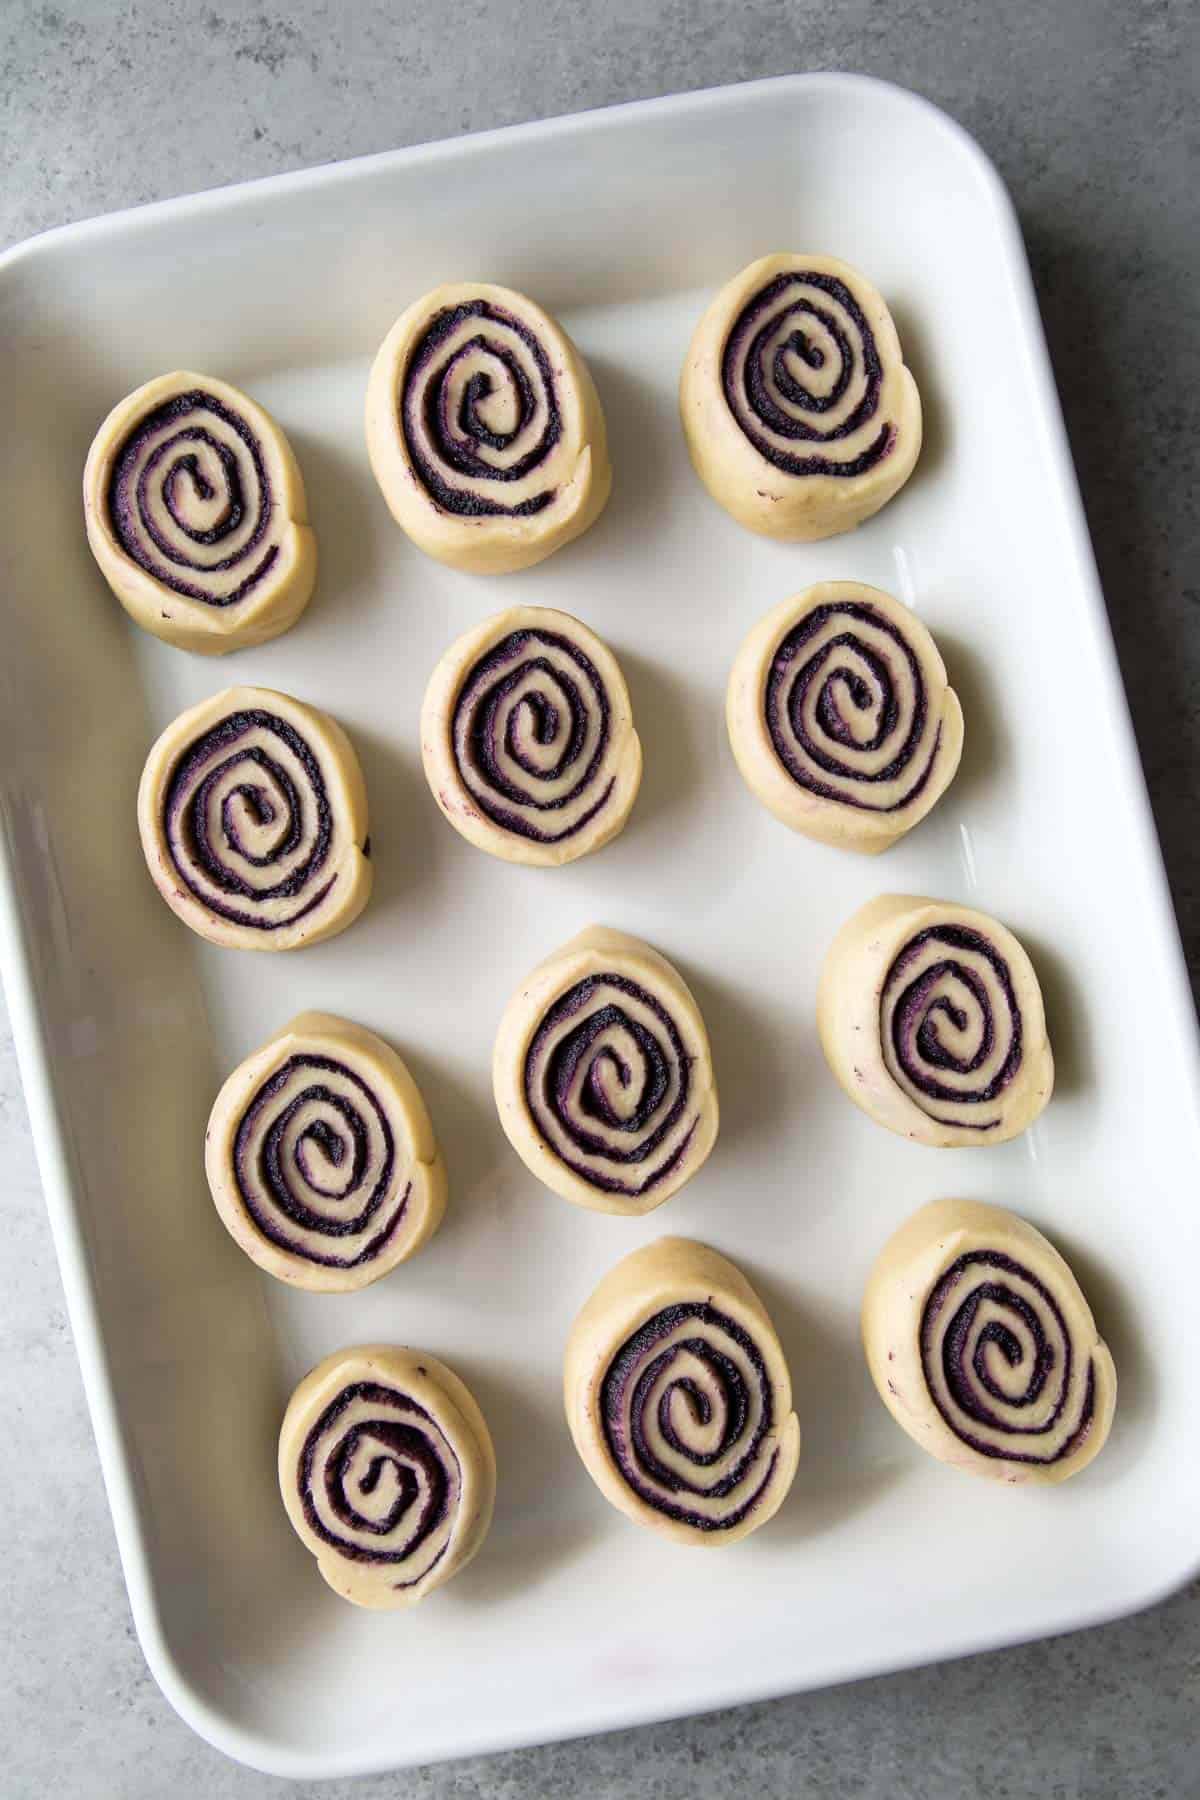 ube bread rolls before proofing.